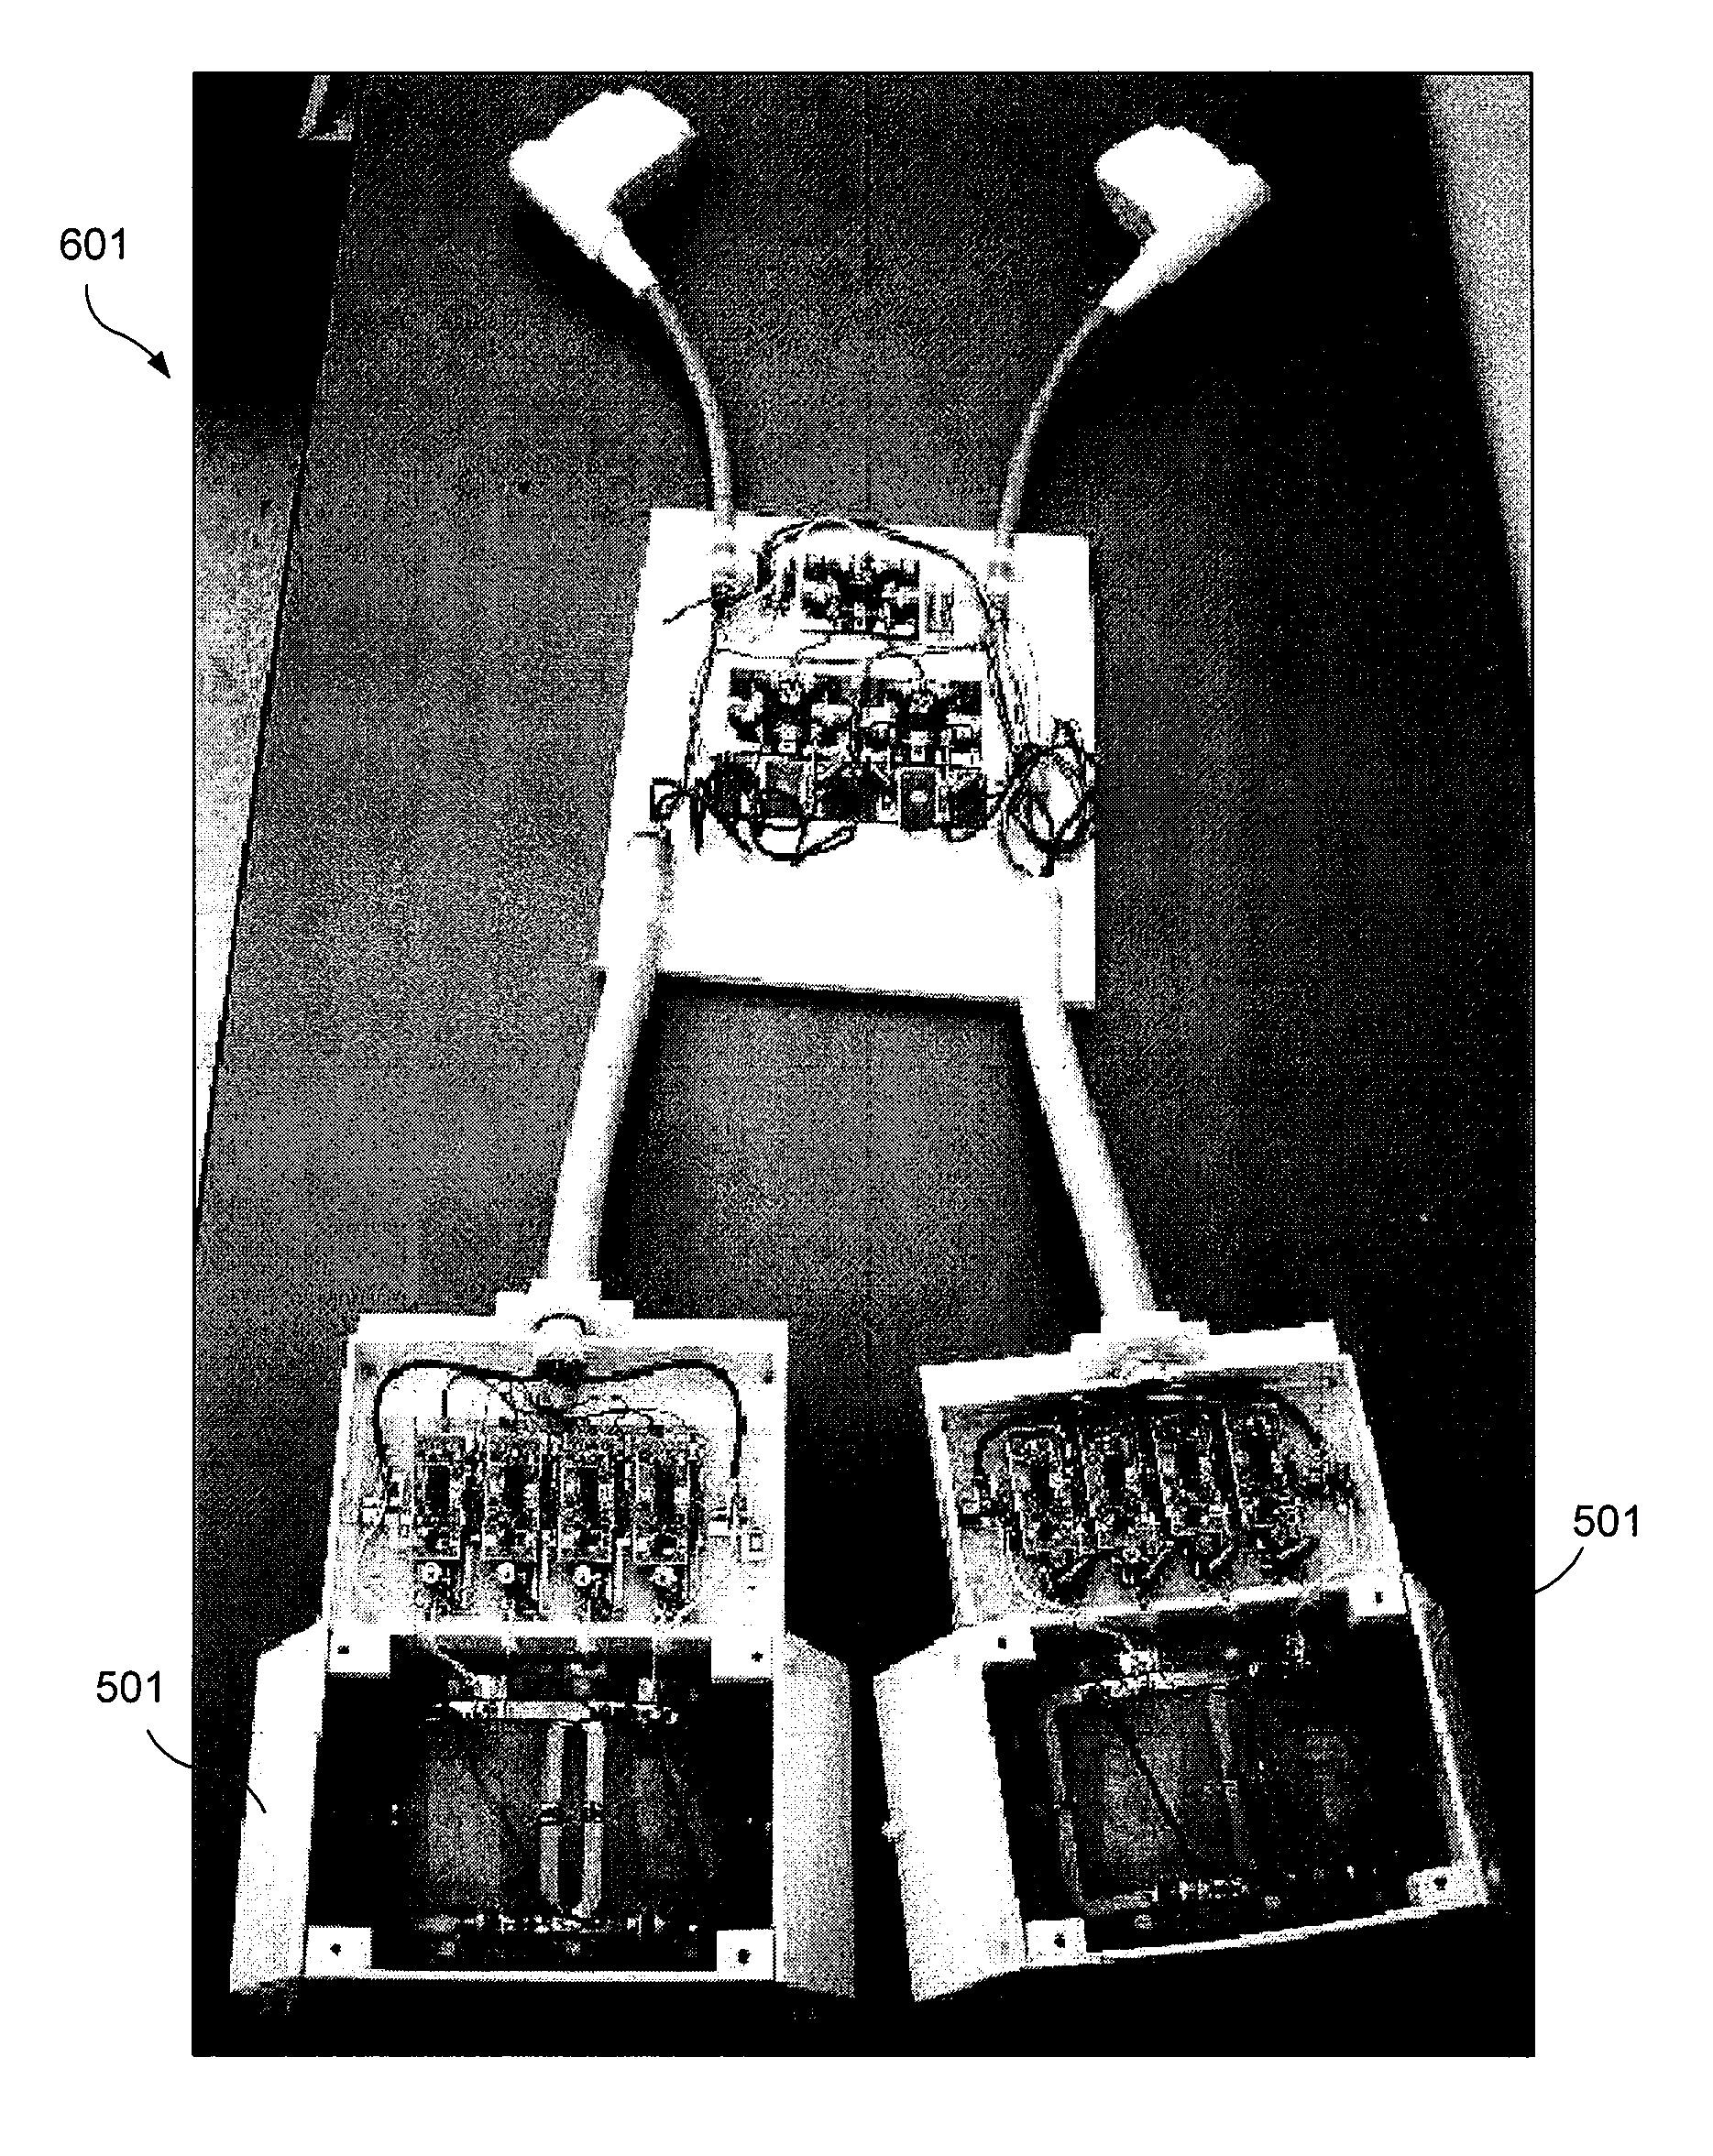 Radio frequency coil arrangement for high field magnetic resonance imaging with optimized transmit and receive efficiency for a specified region of interest, and related system and method